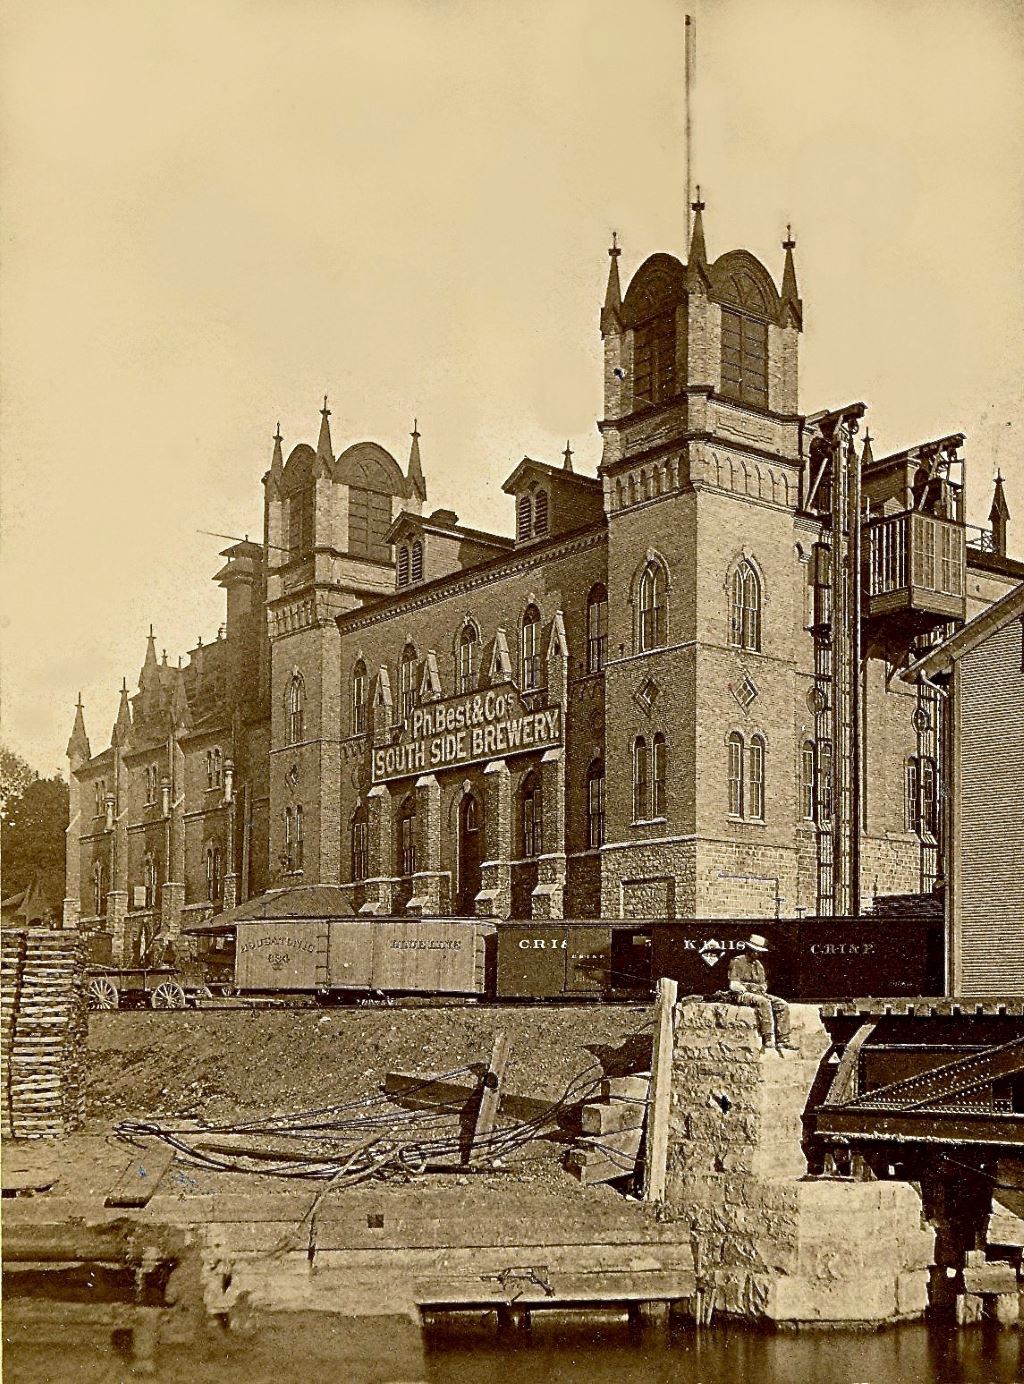 Philip Best & Co. Brewery, 1880. Image courtesy of Jeff Beutner.